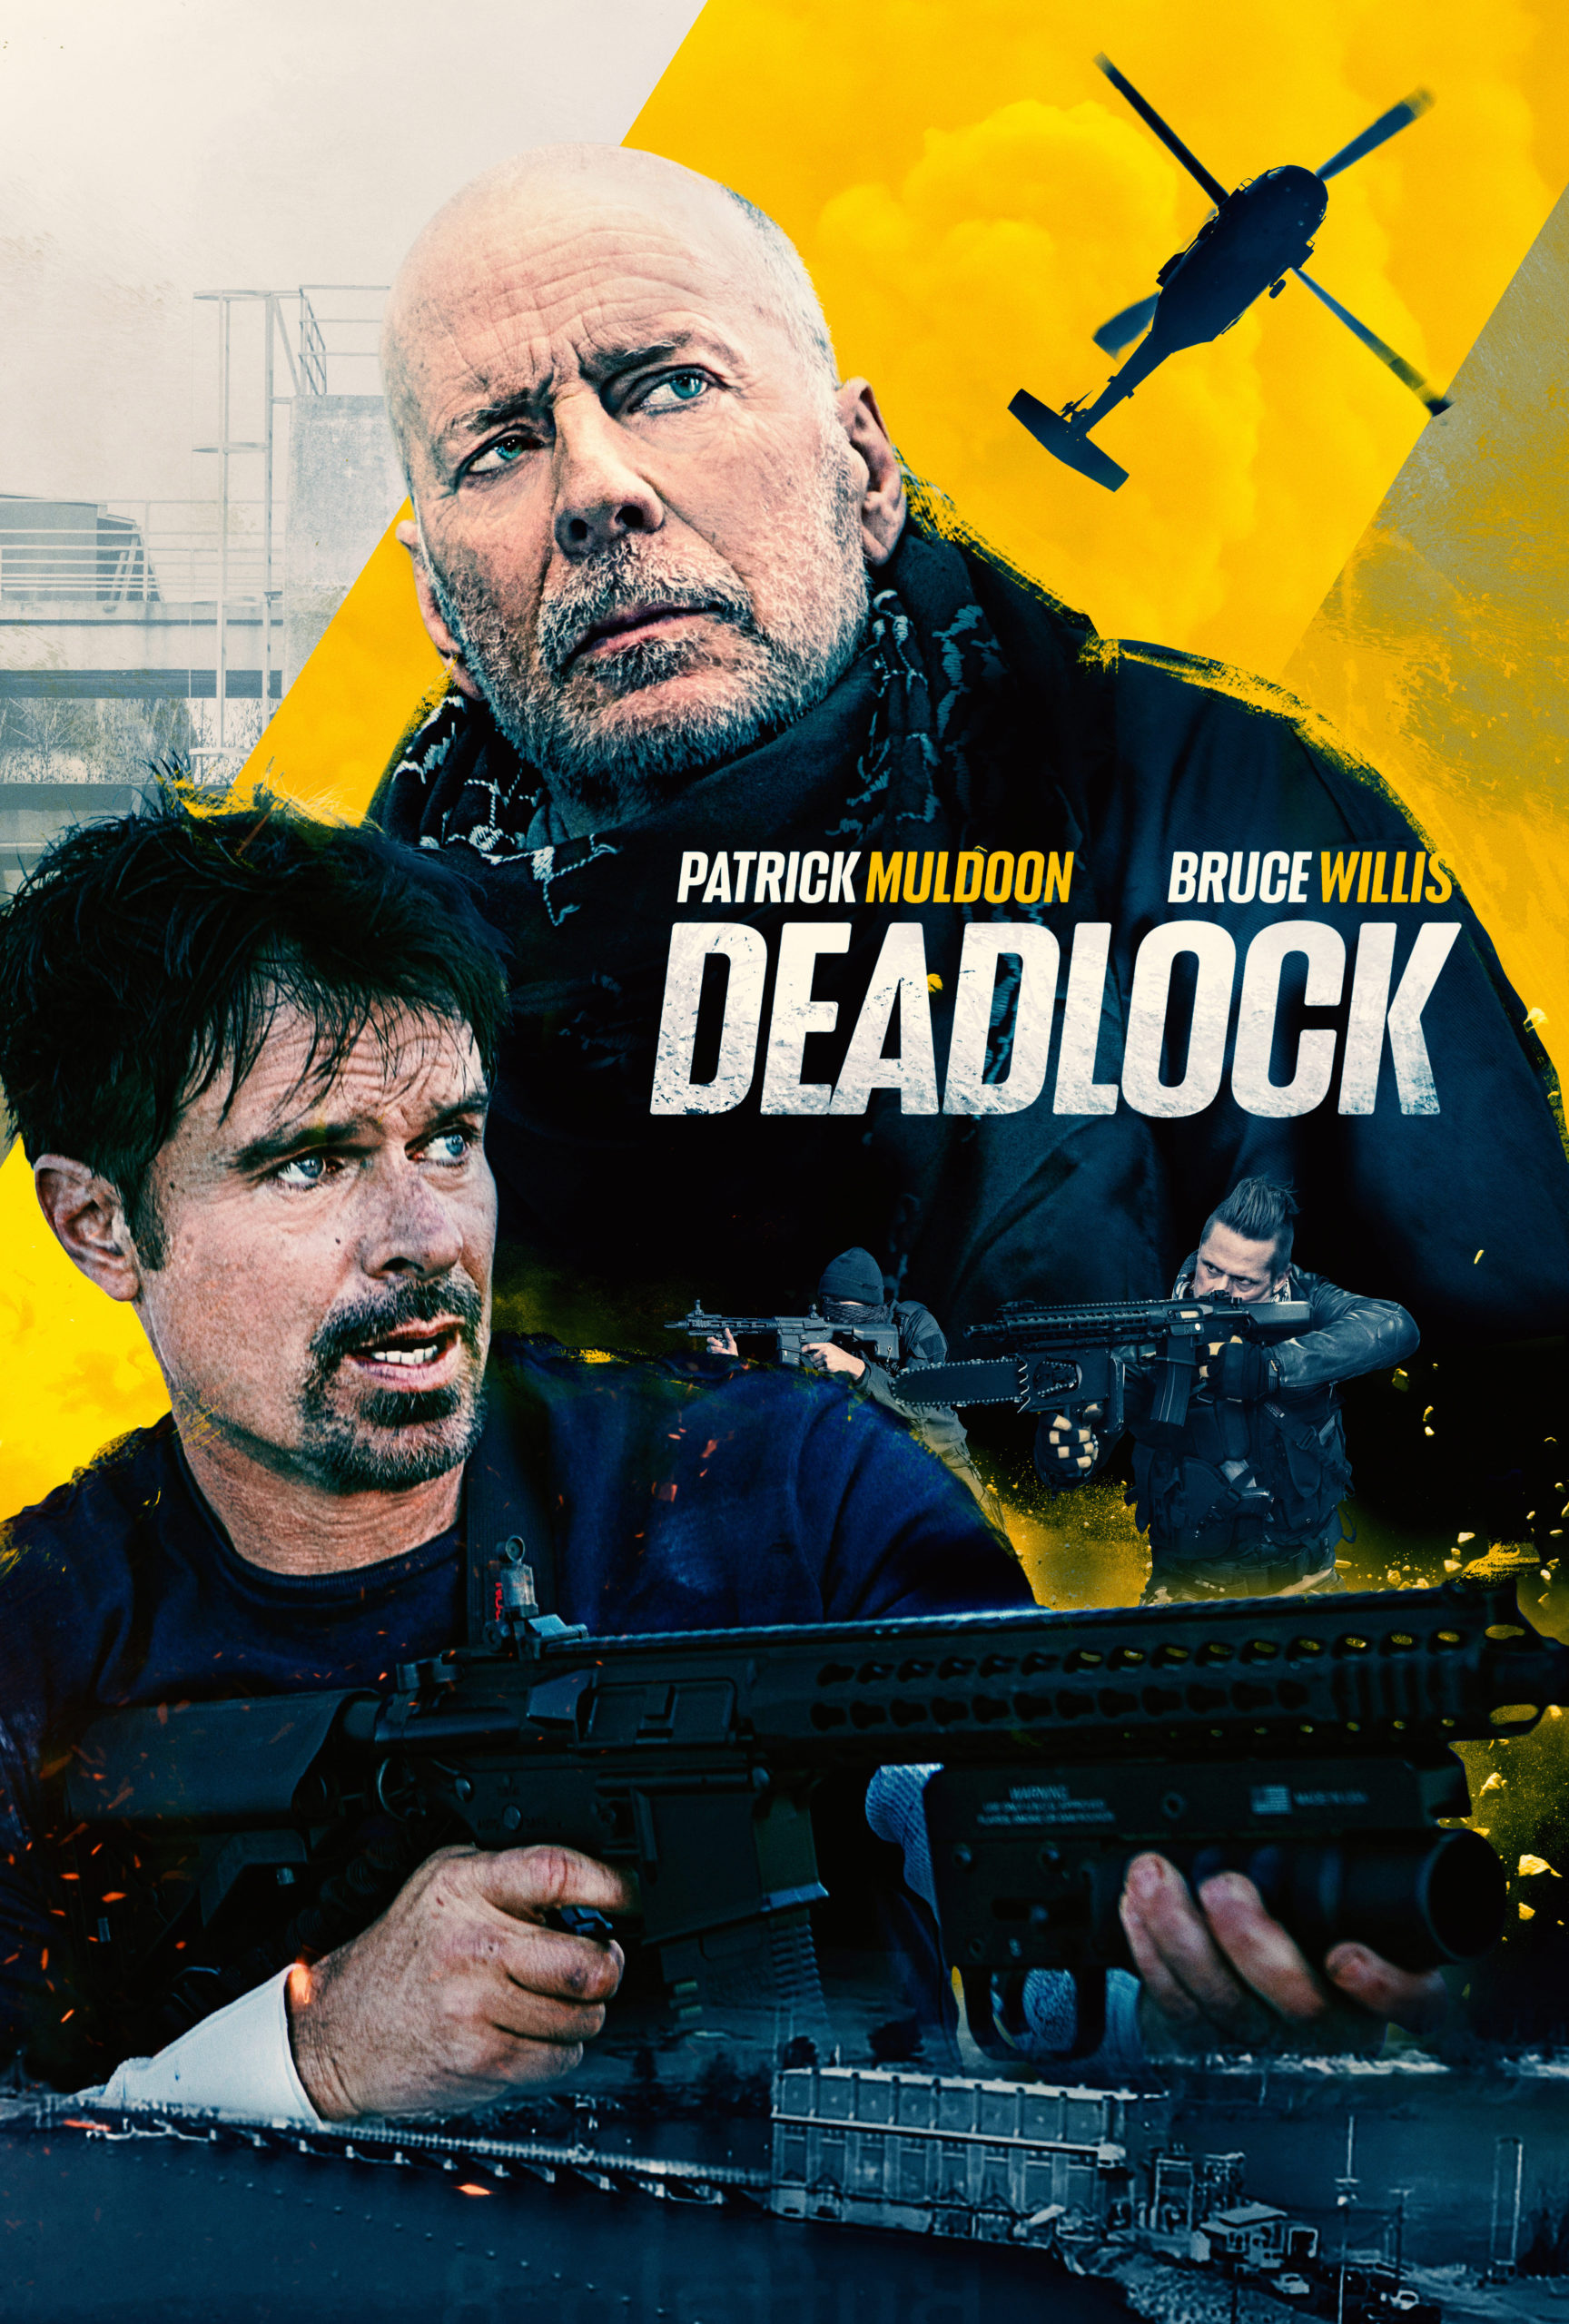 Deadlock Poster with Bruce Willis and Patrick Muldoon